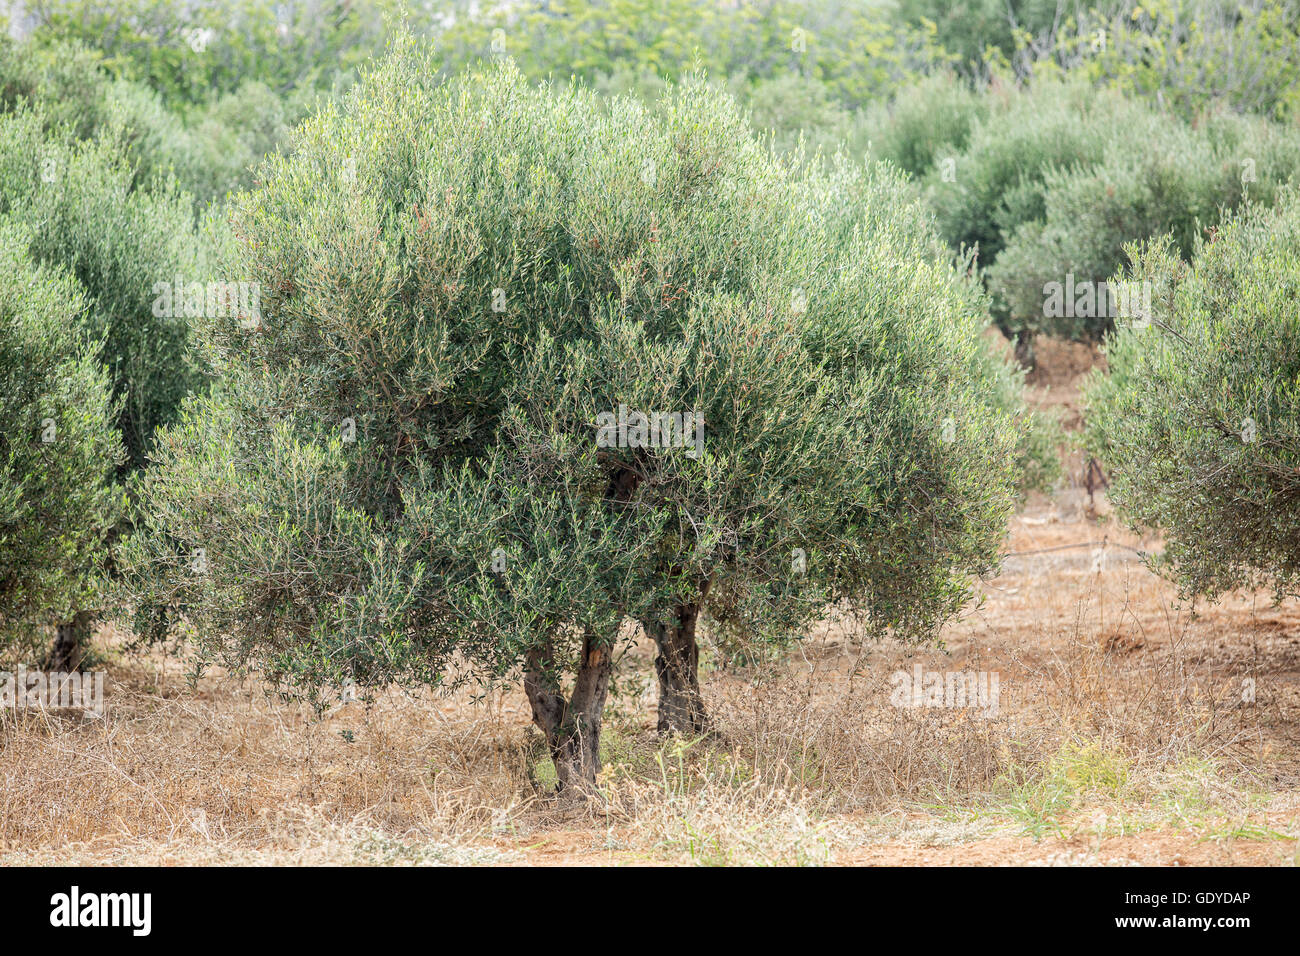 Olive trees garden. Long row of trees on the sky background. Stock Photo